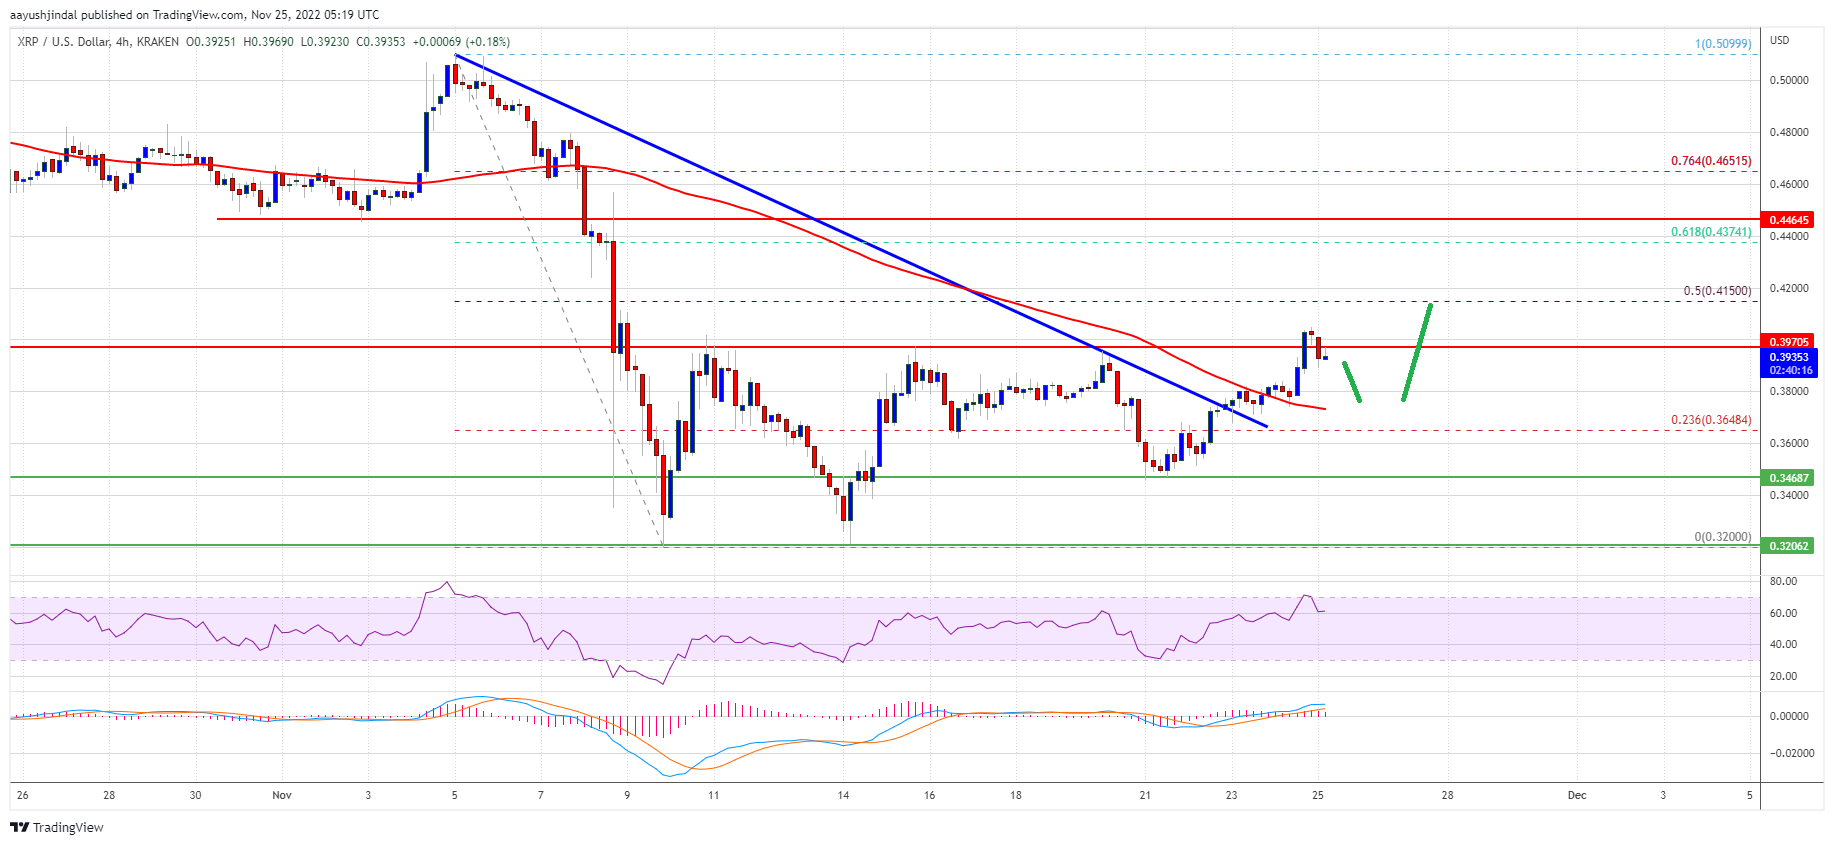 XRP Price Prediction: Why The Bulls Could Aim Fresh Rally To $0.45